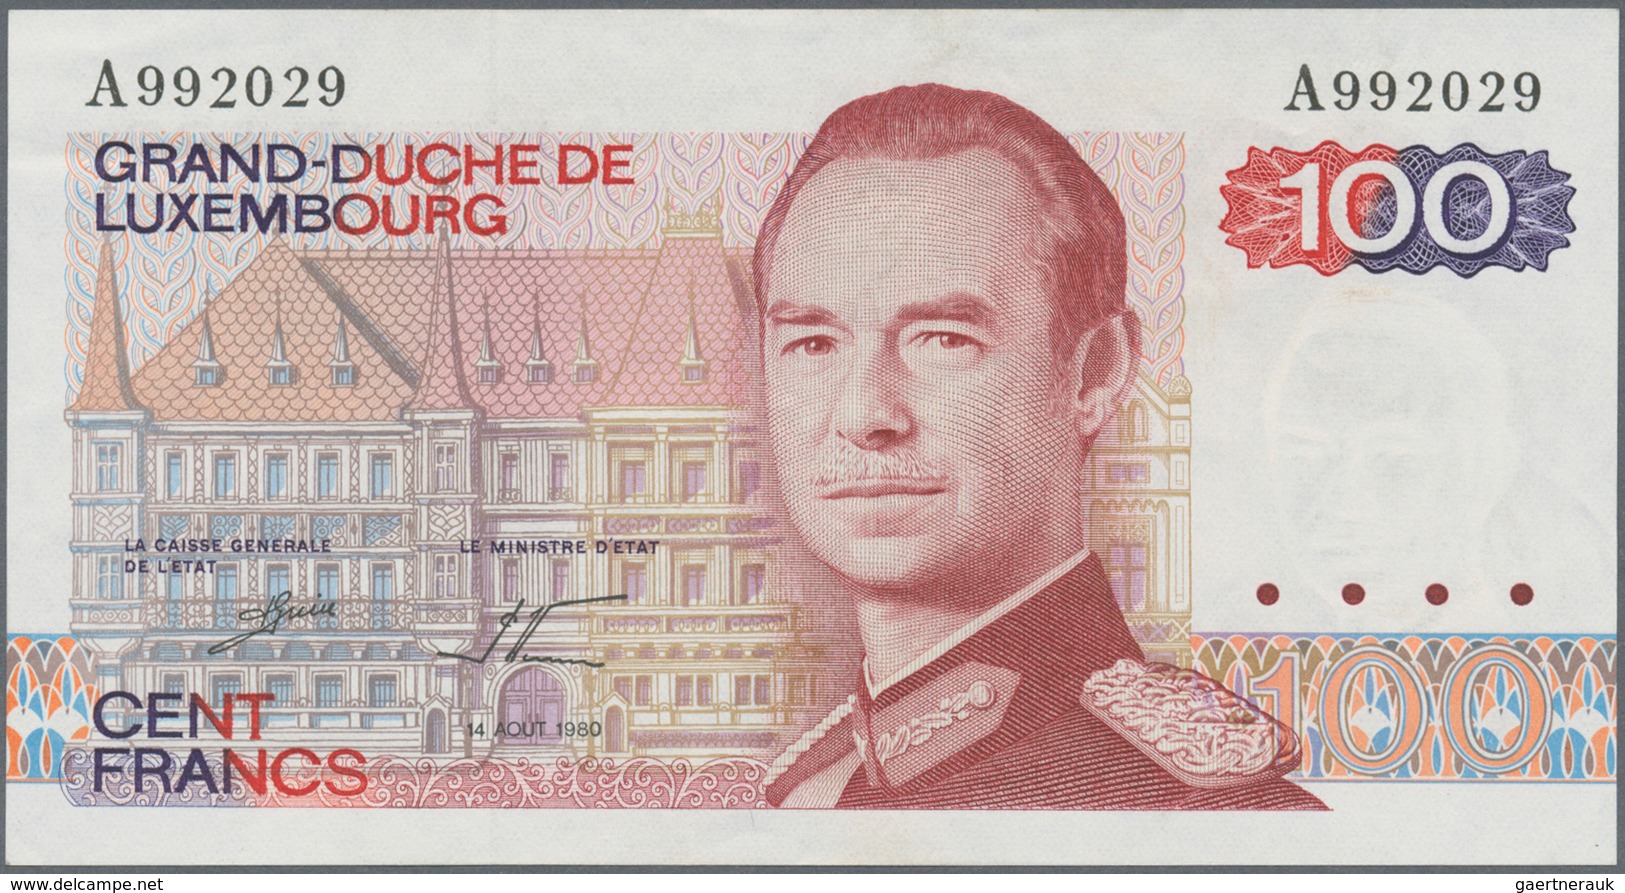 01946 Luxembourg: set of 4 notes 3x different issues Francs 1970/80 (in used condition) P. 56-58 and a Not